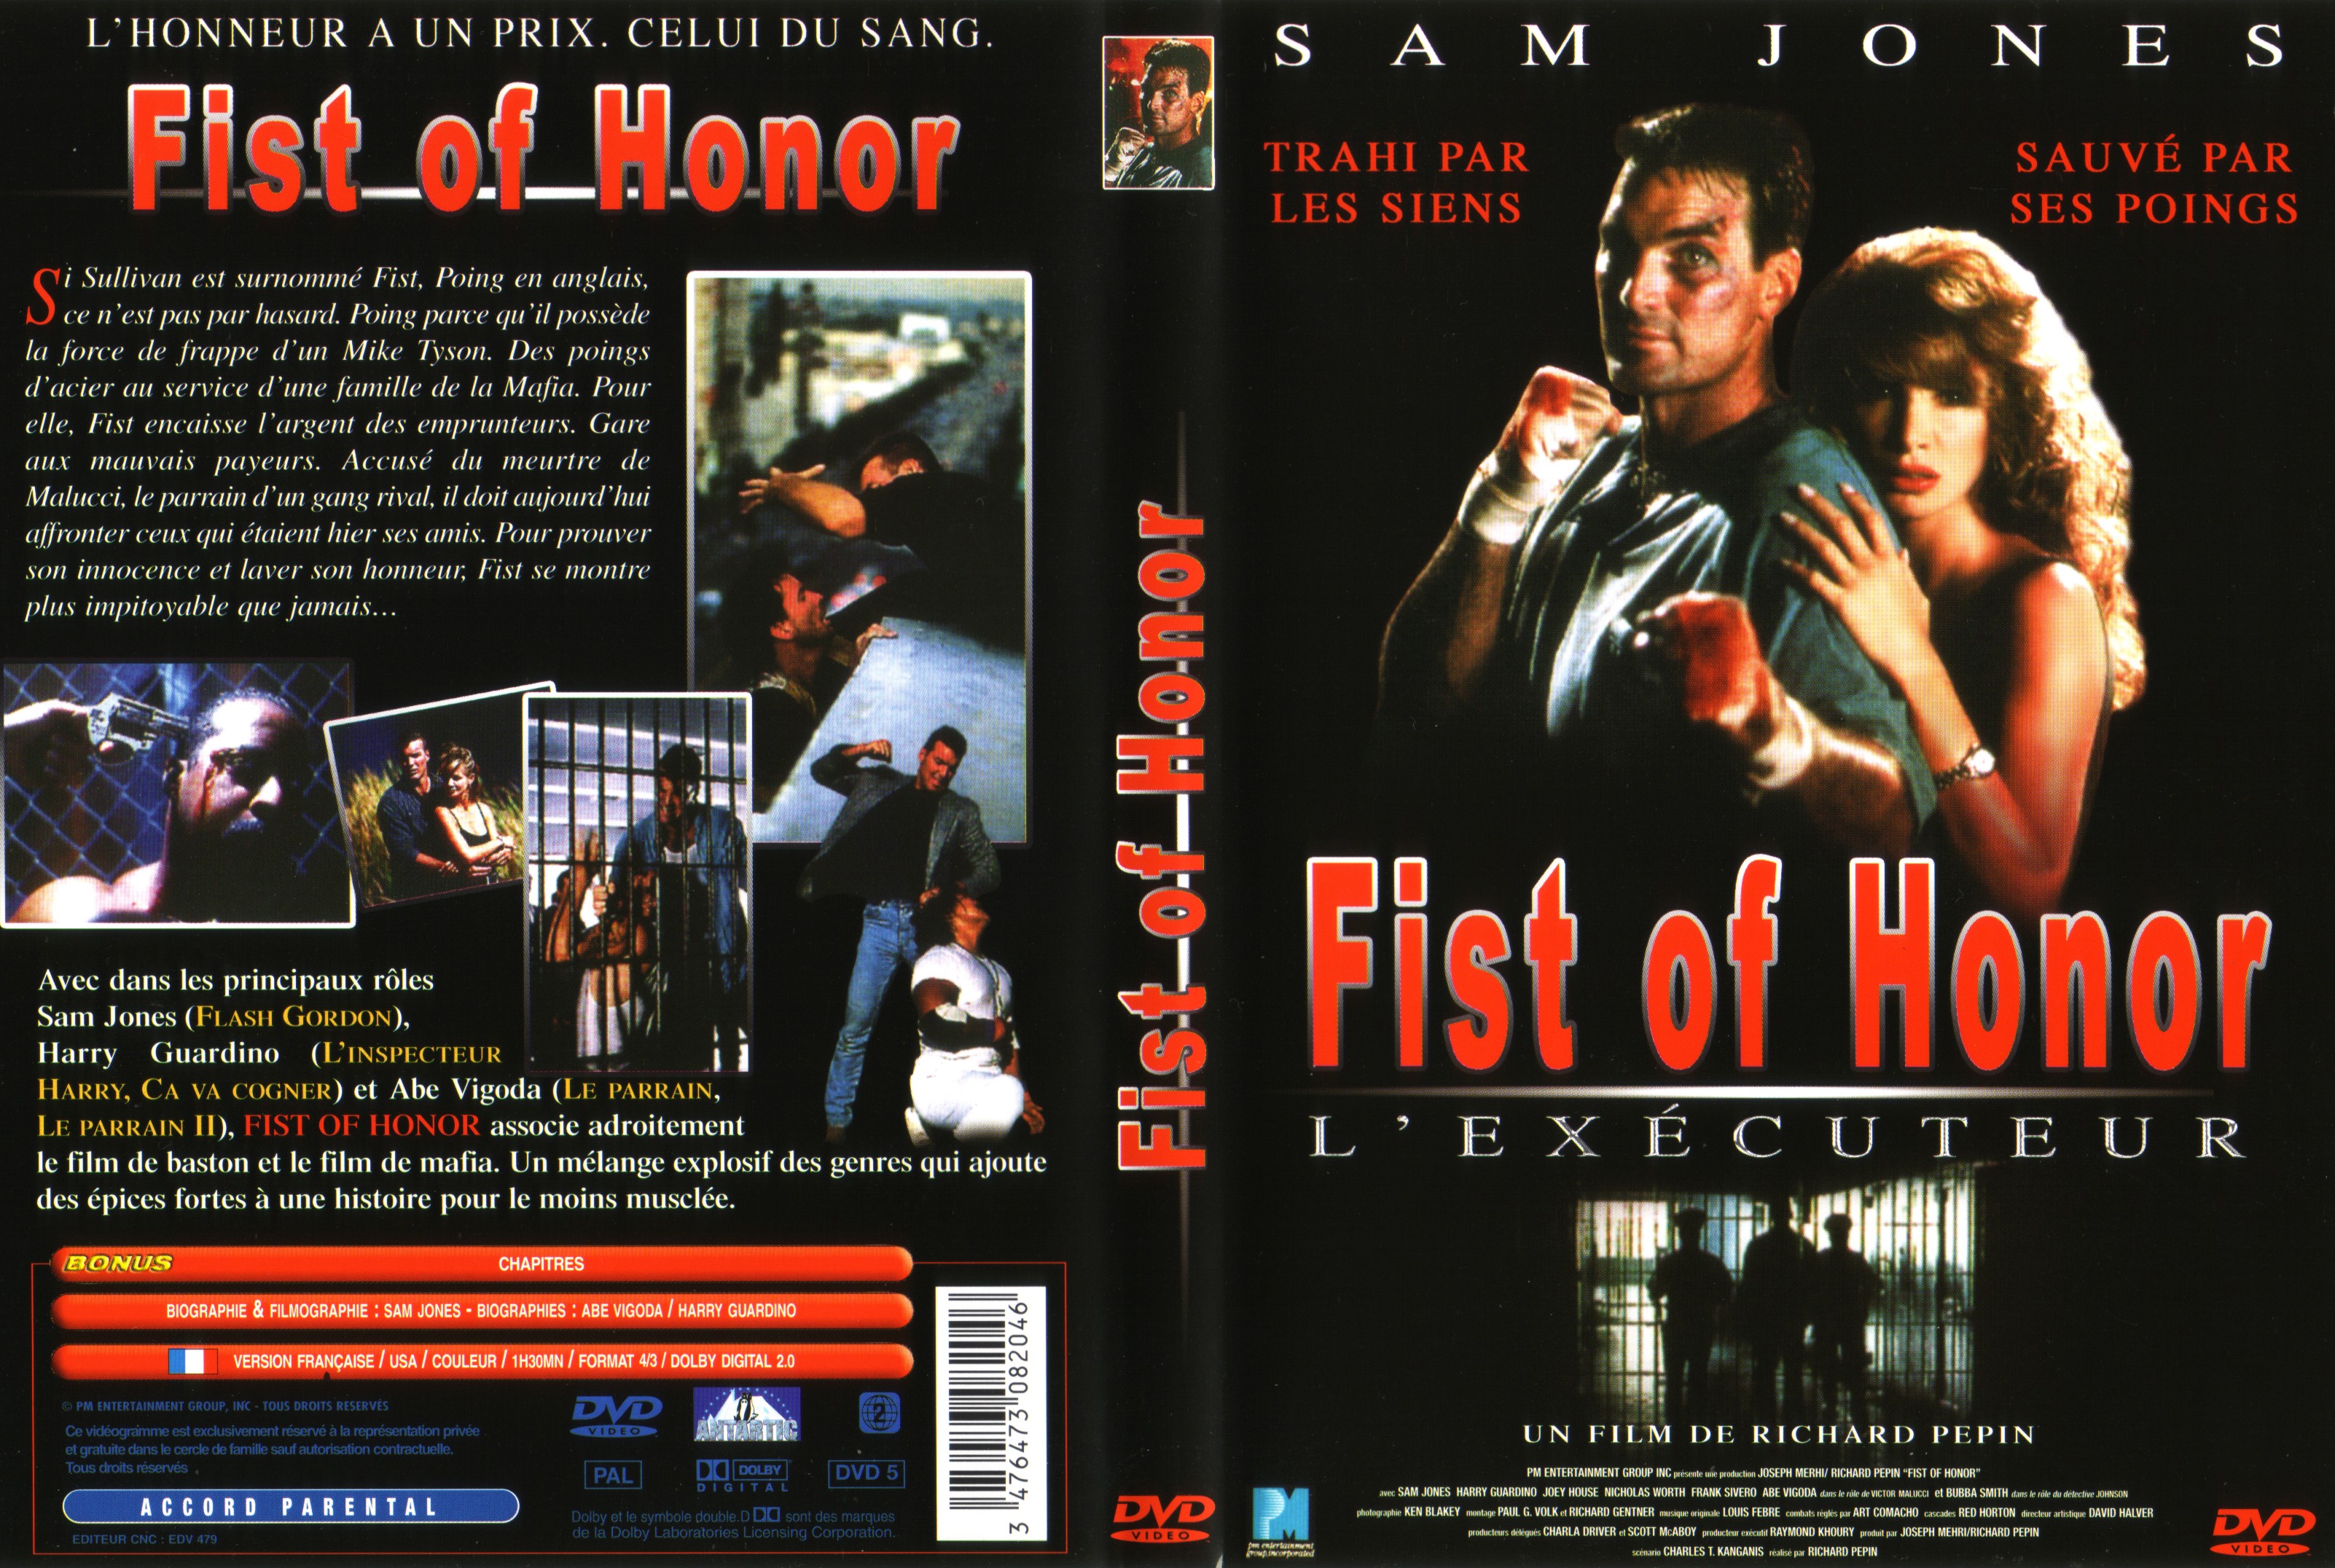 Jaquette DVD Fist of honor